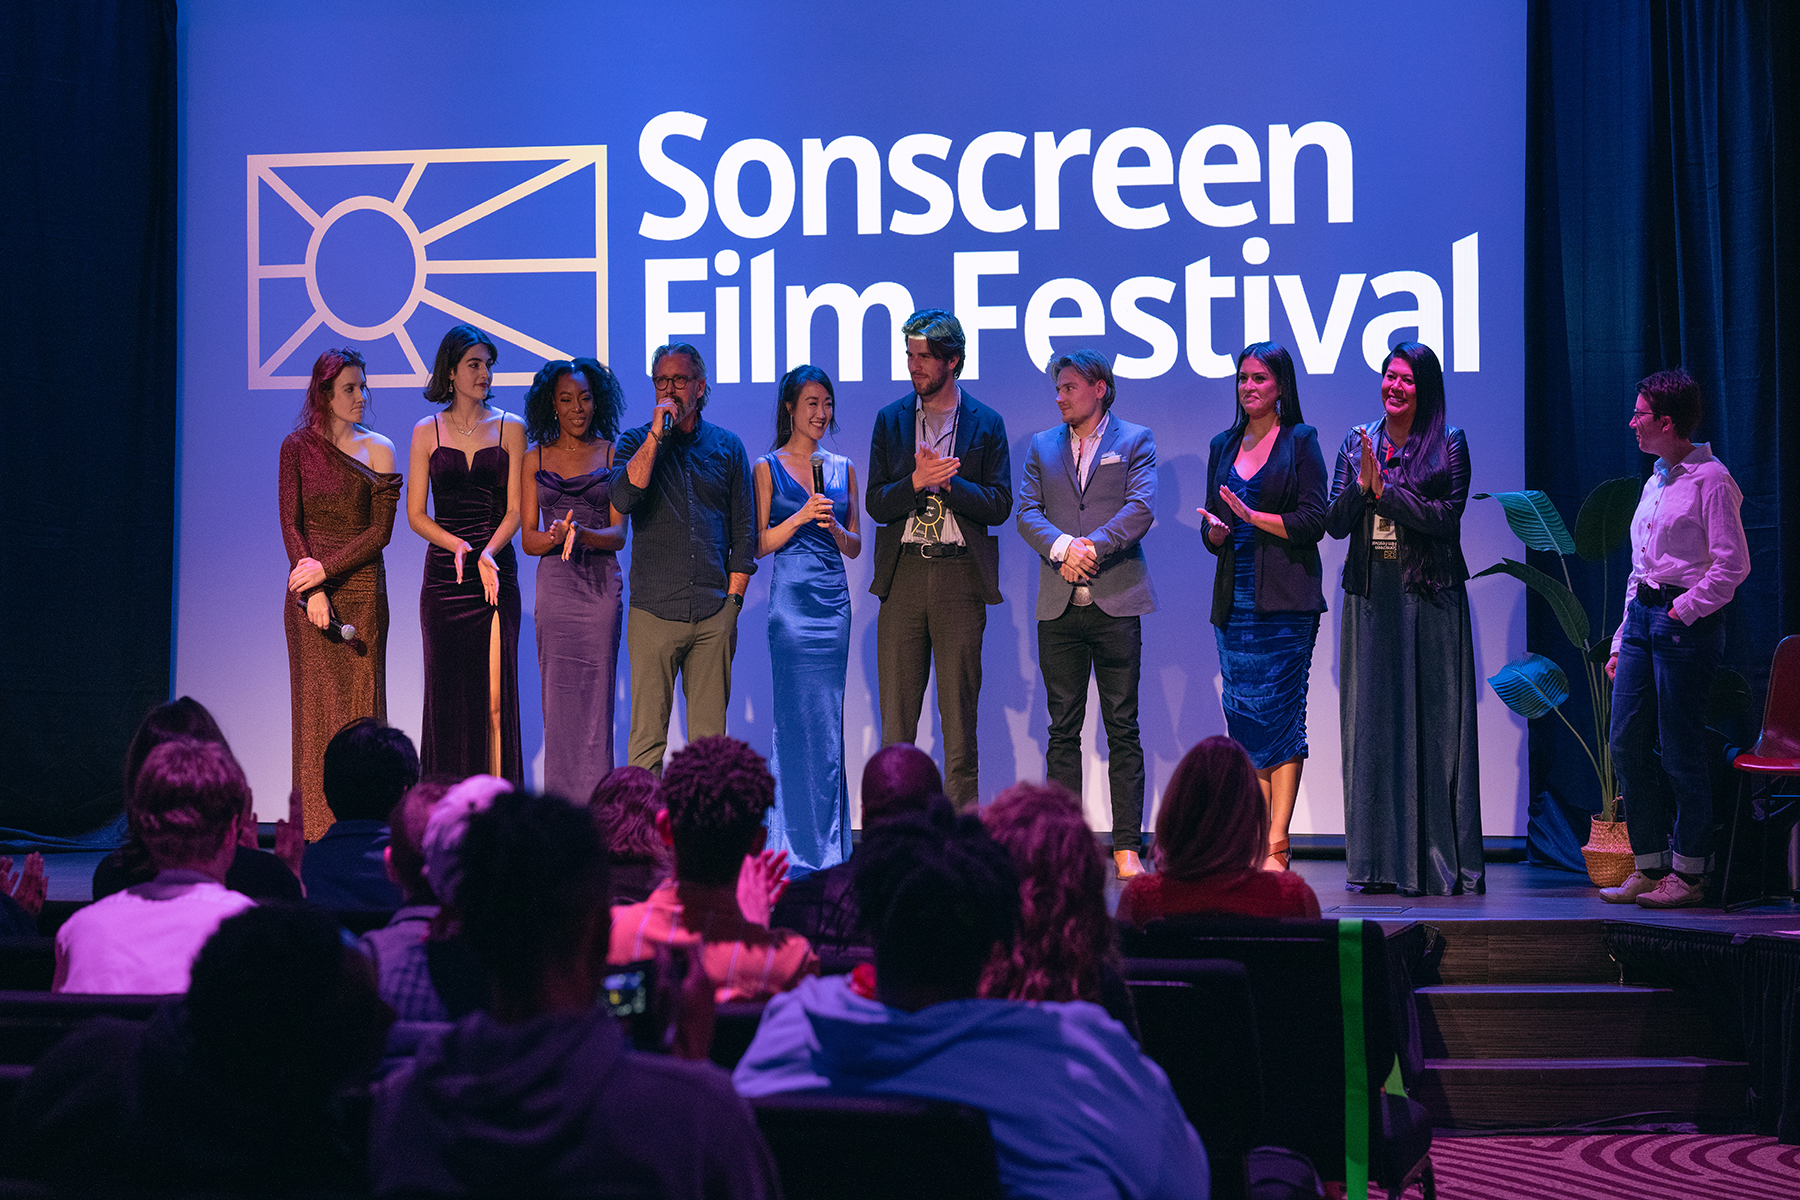 A diverse group of people stand on stage in front of an audience. The words "Sonscreen Film Festival" are behind them.